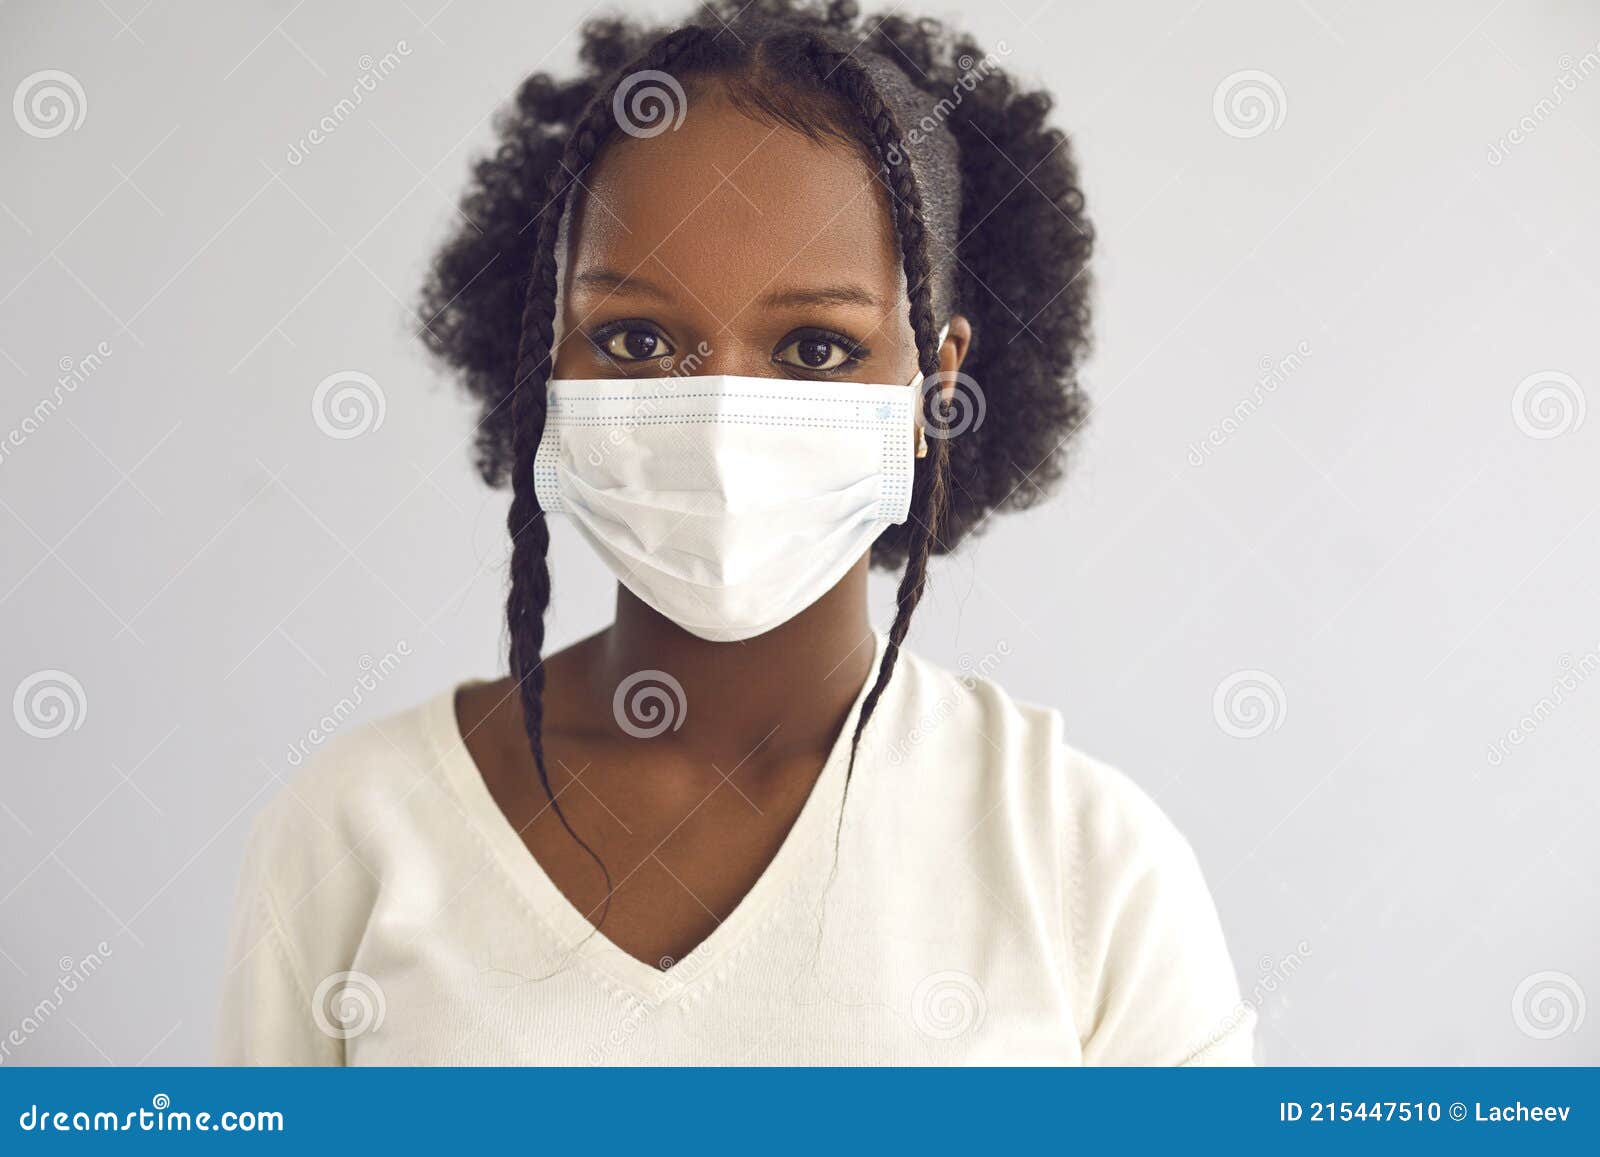 Studio Headshot of a Young African Woman Wearing a Disposable Surgical ...